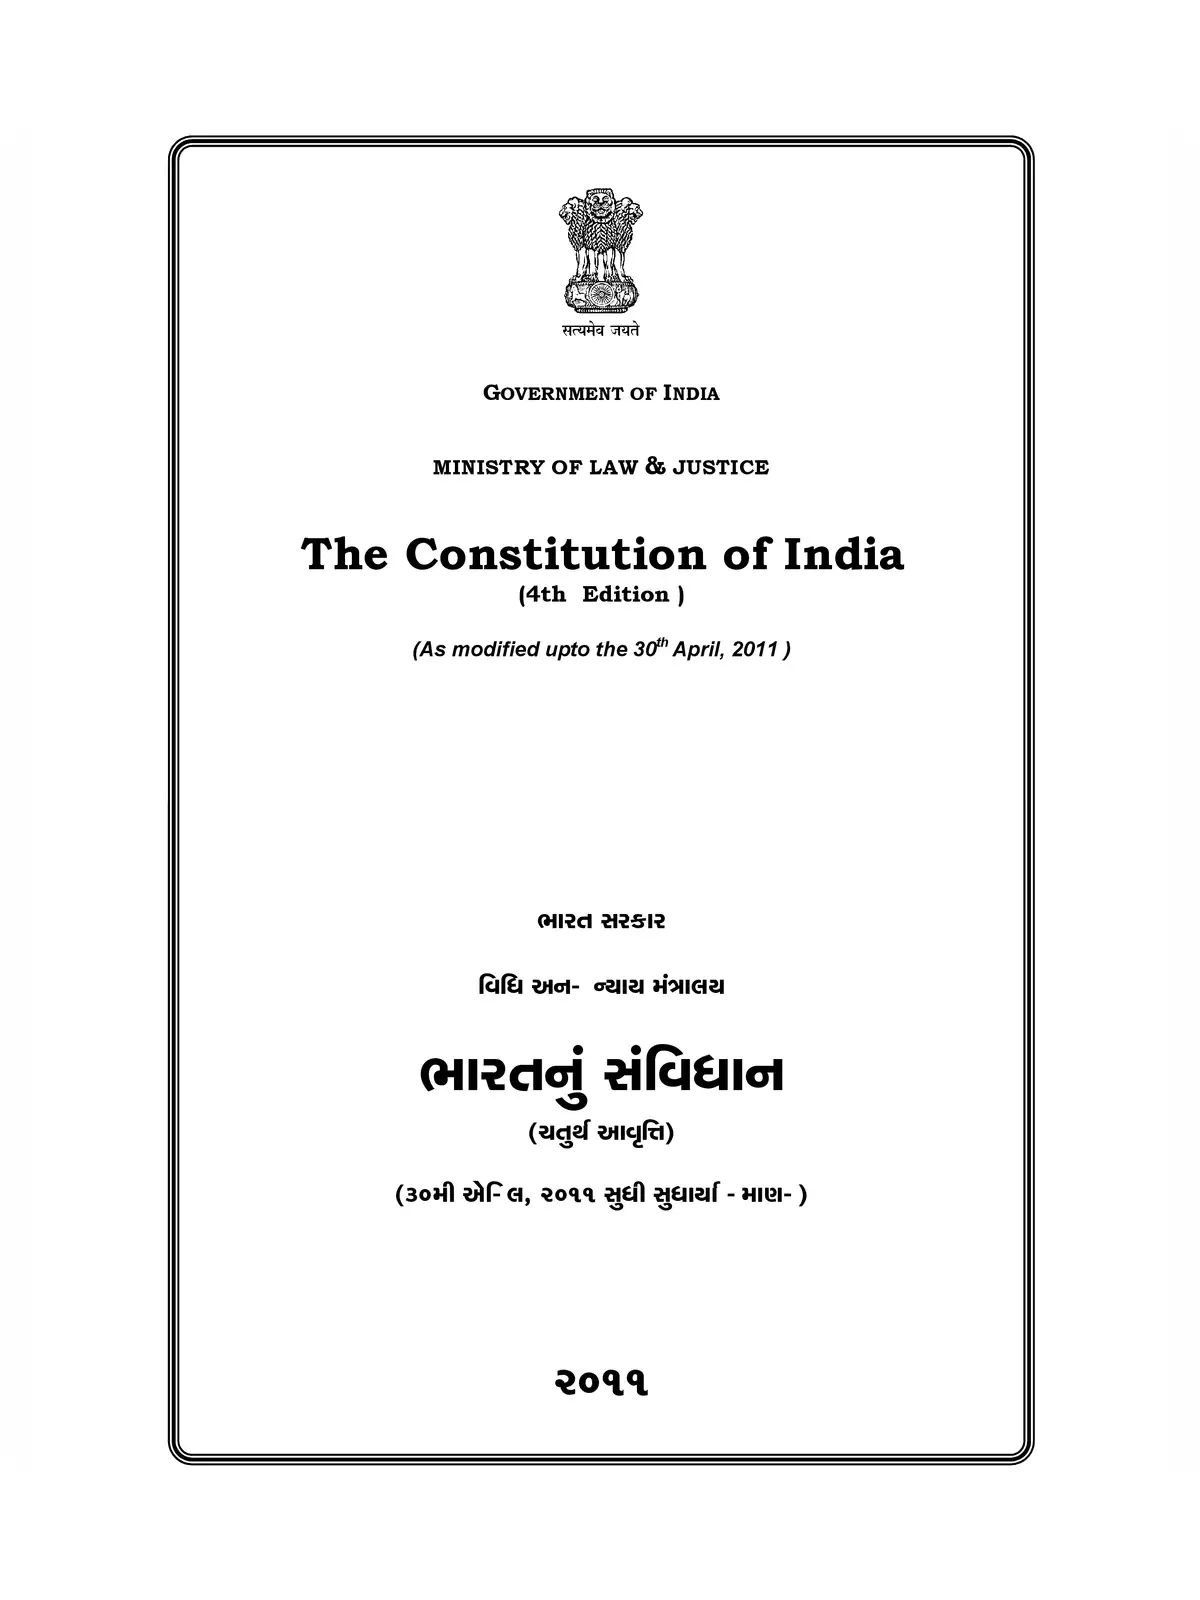 The Constitutions of India